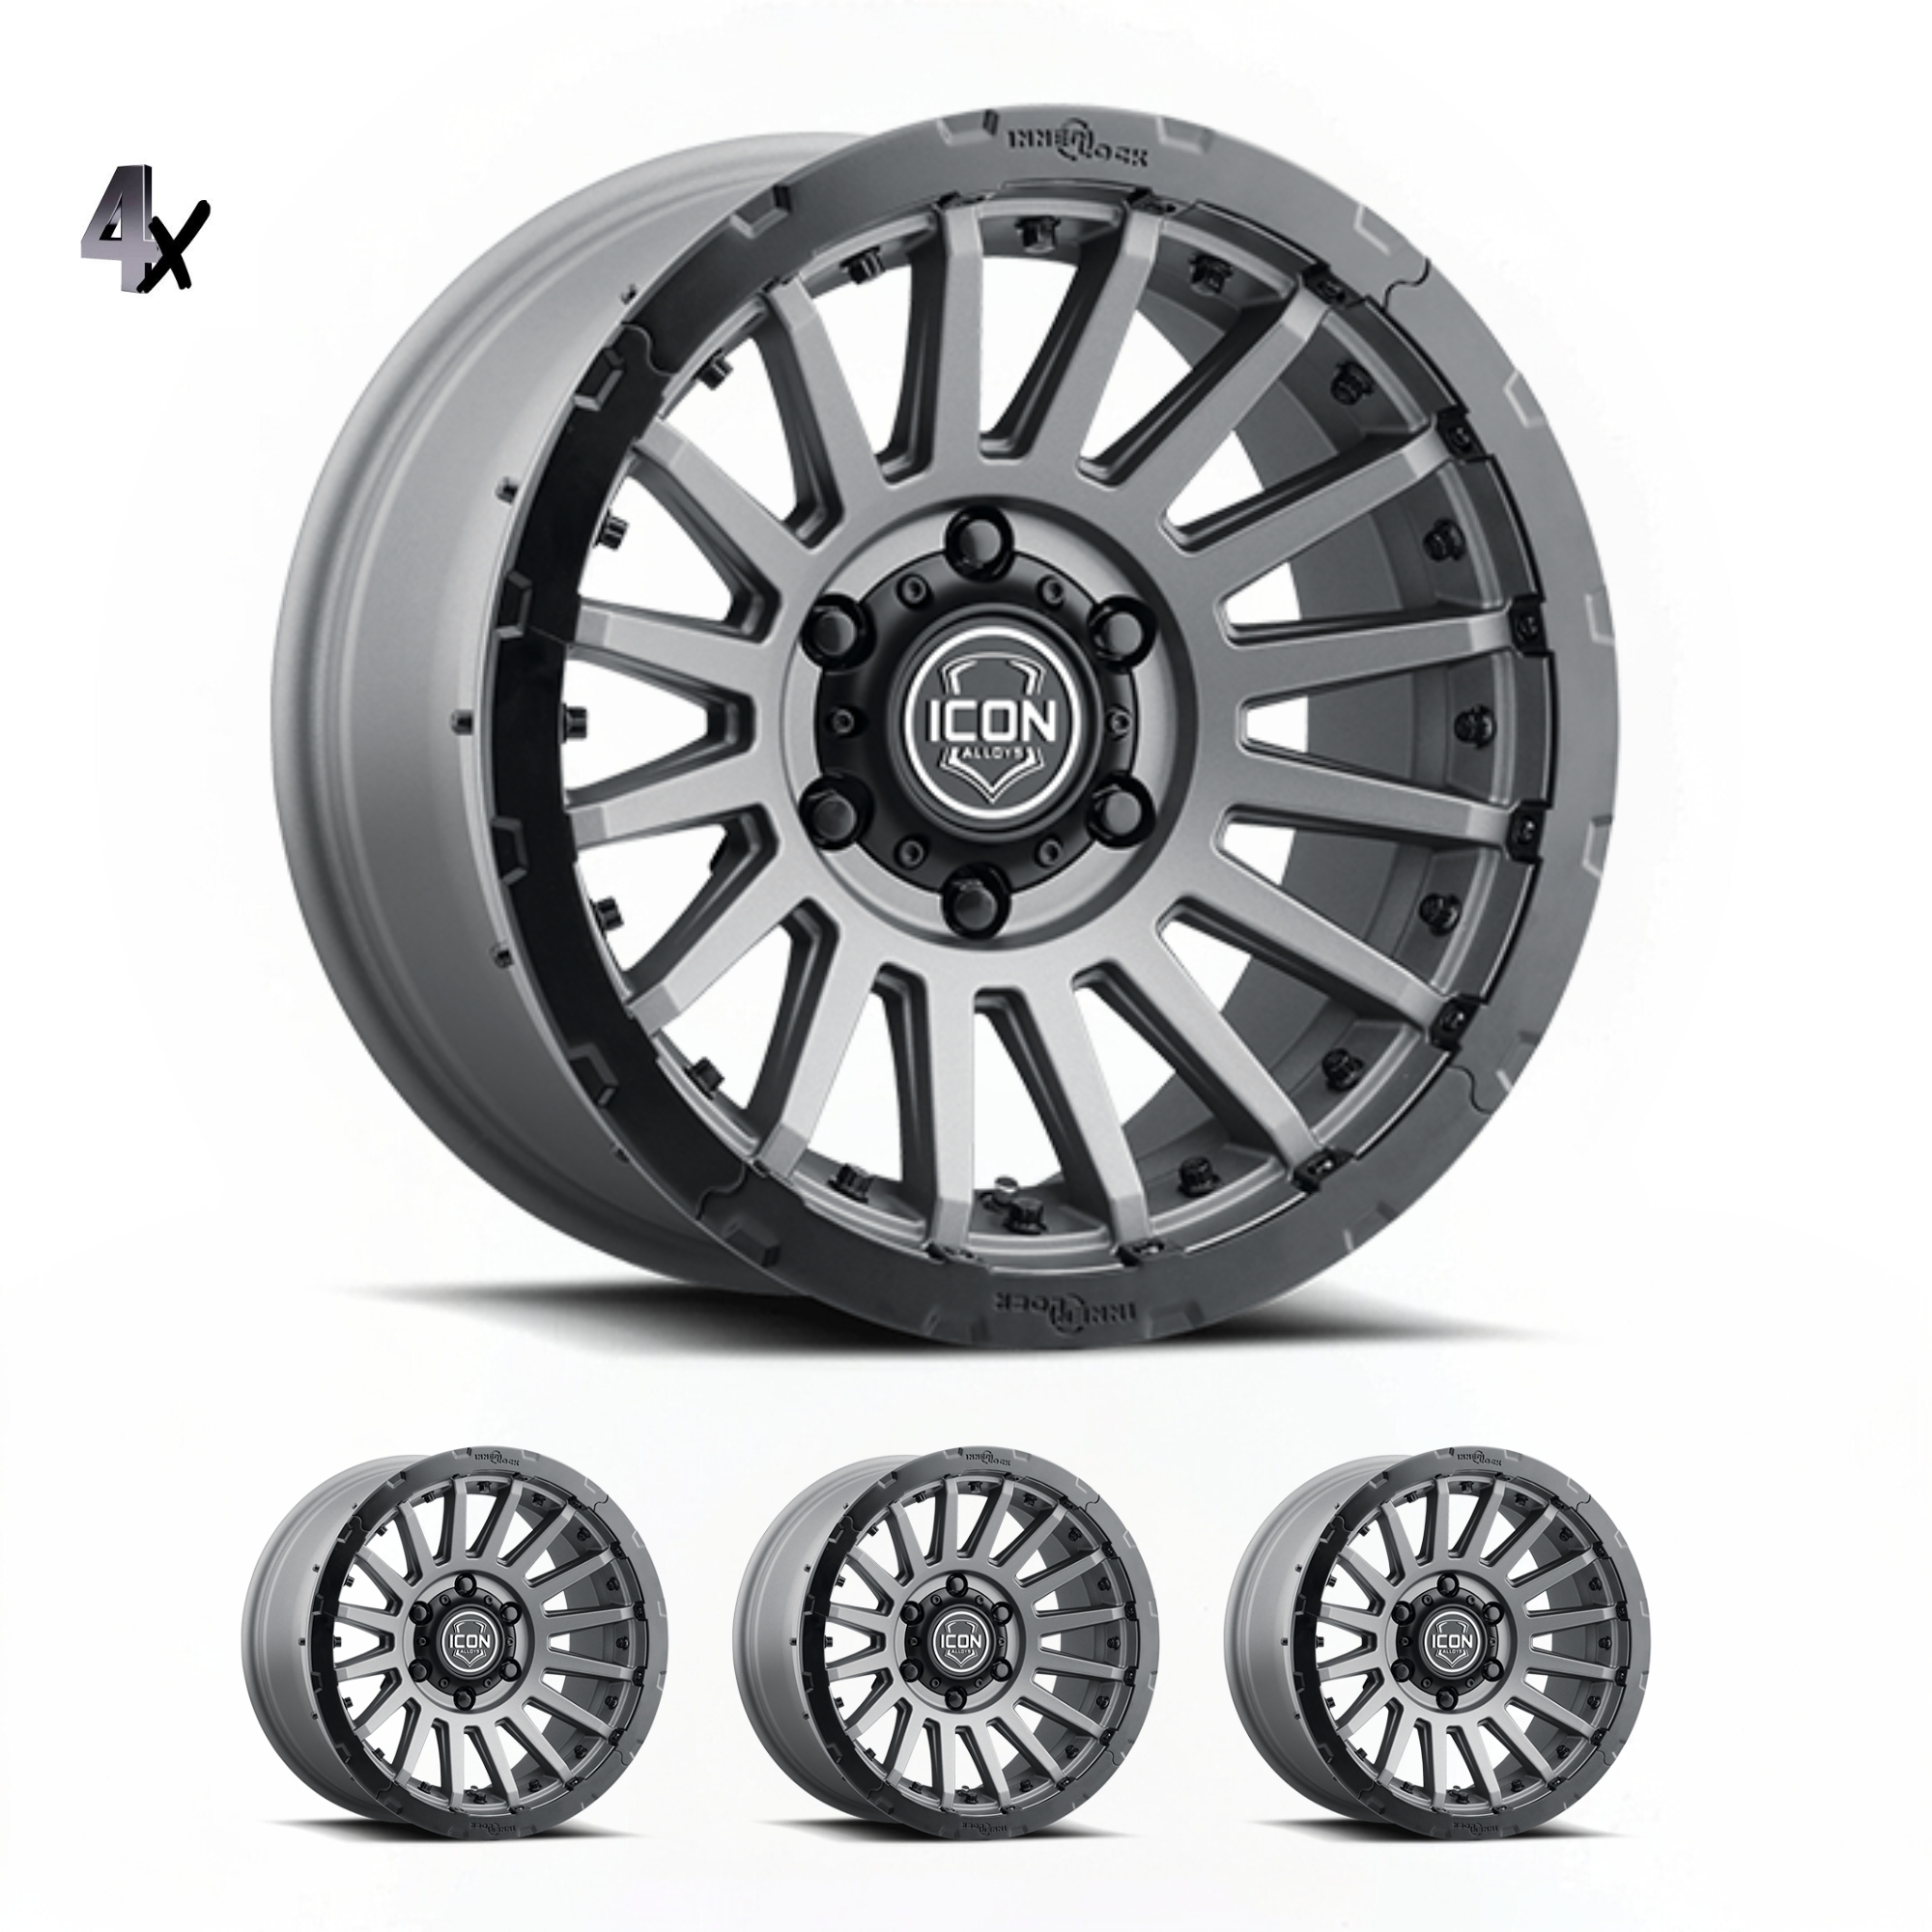 LC200 (17×8.5) 4x RECON PRO CHARCOAL 6×135 +6 OFFSET